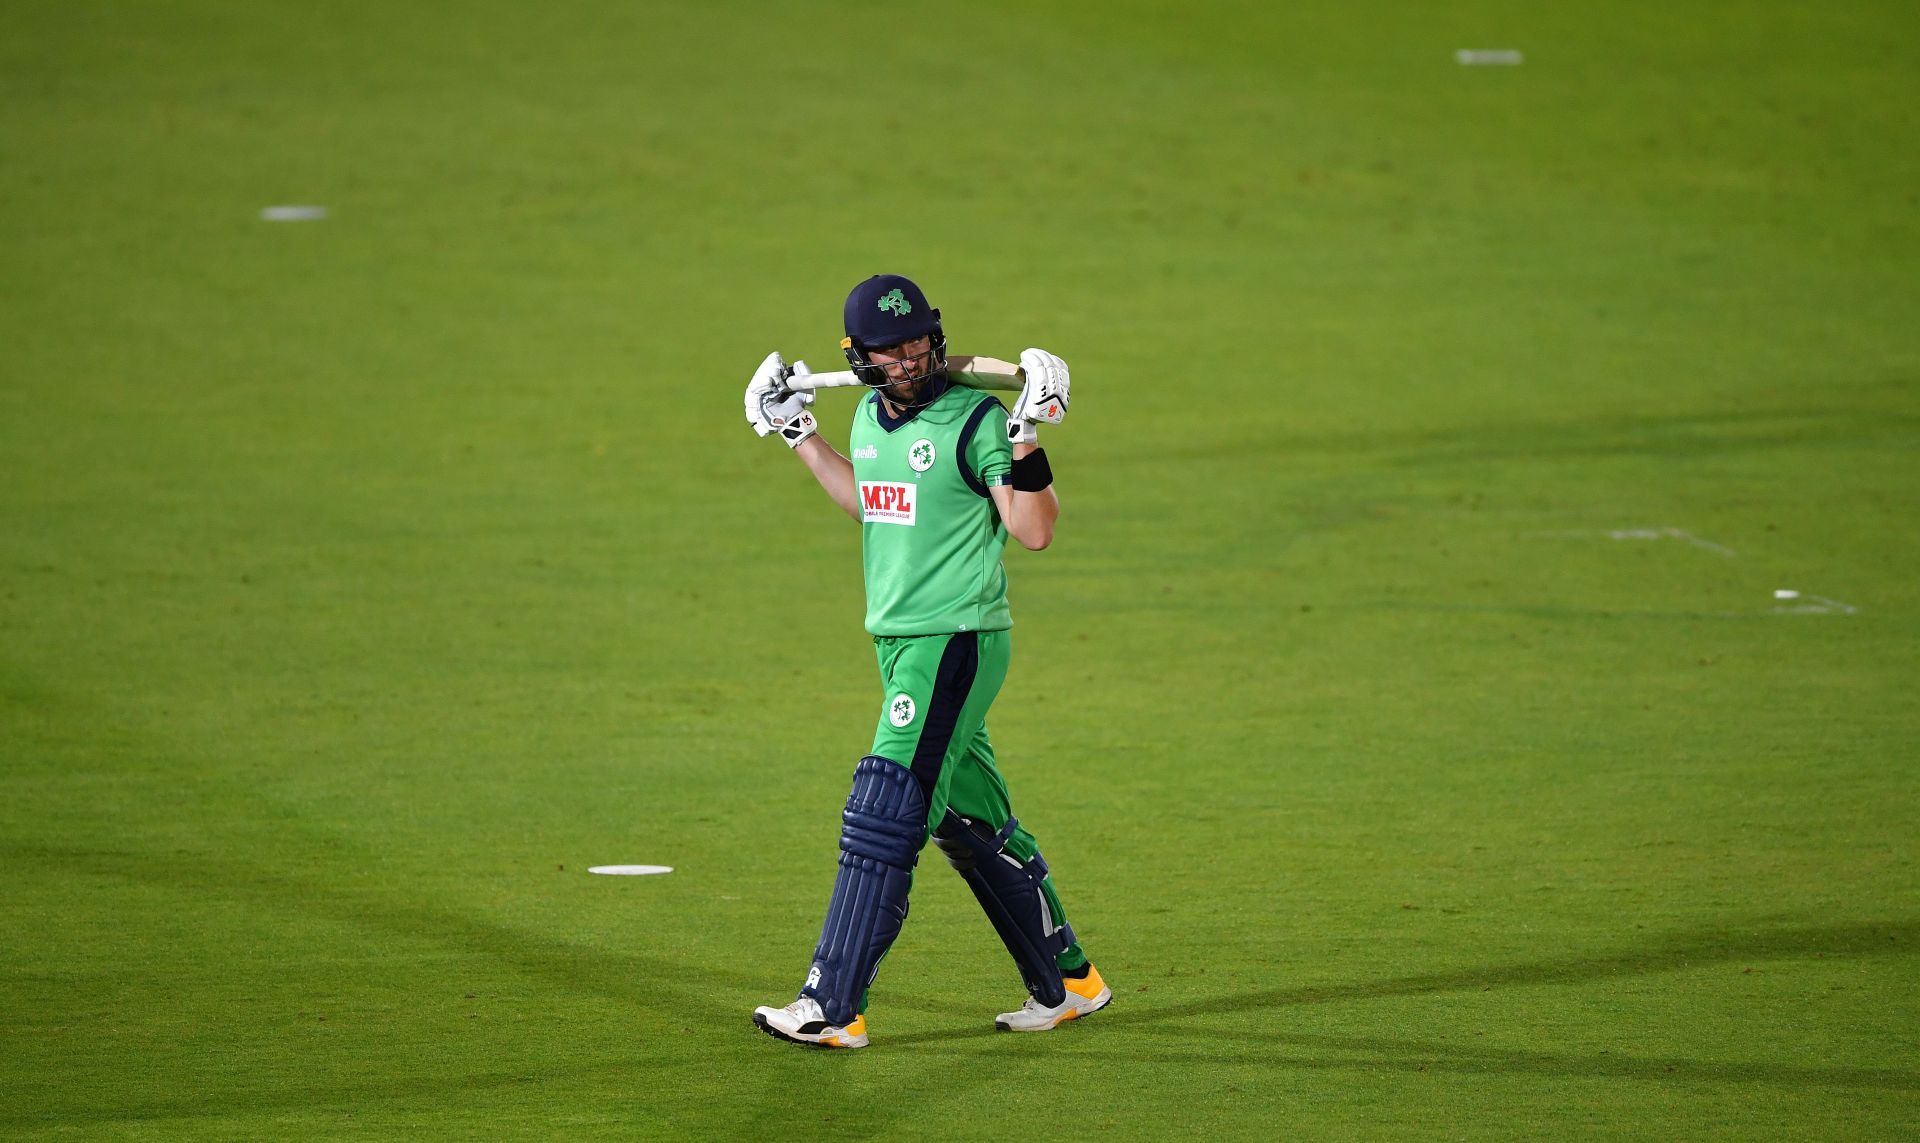 Andrew Balbirnie will captain Ireland in their upcoming series against South Africa and Afghanistan (Image: Getty)